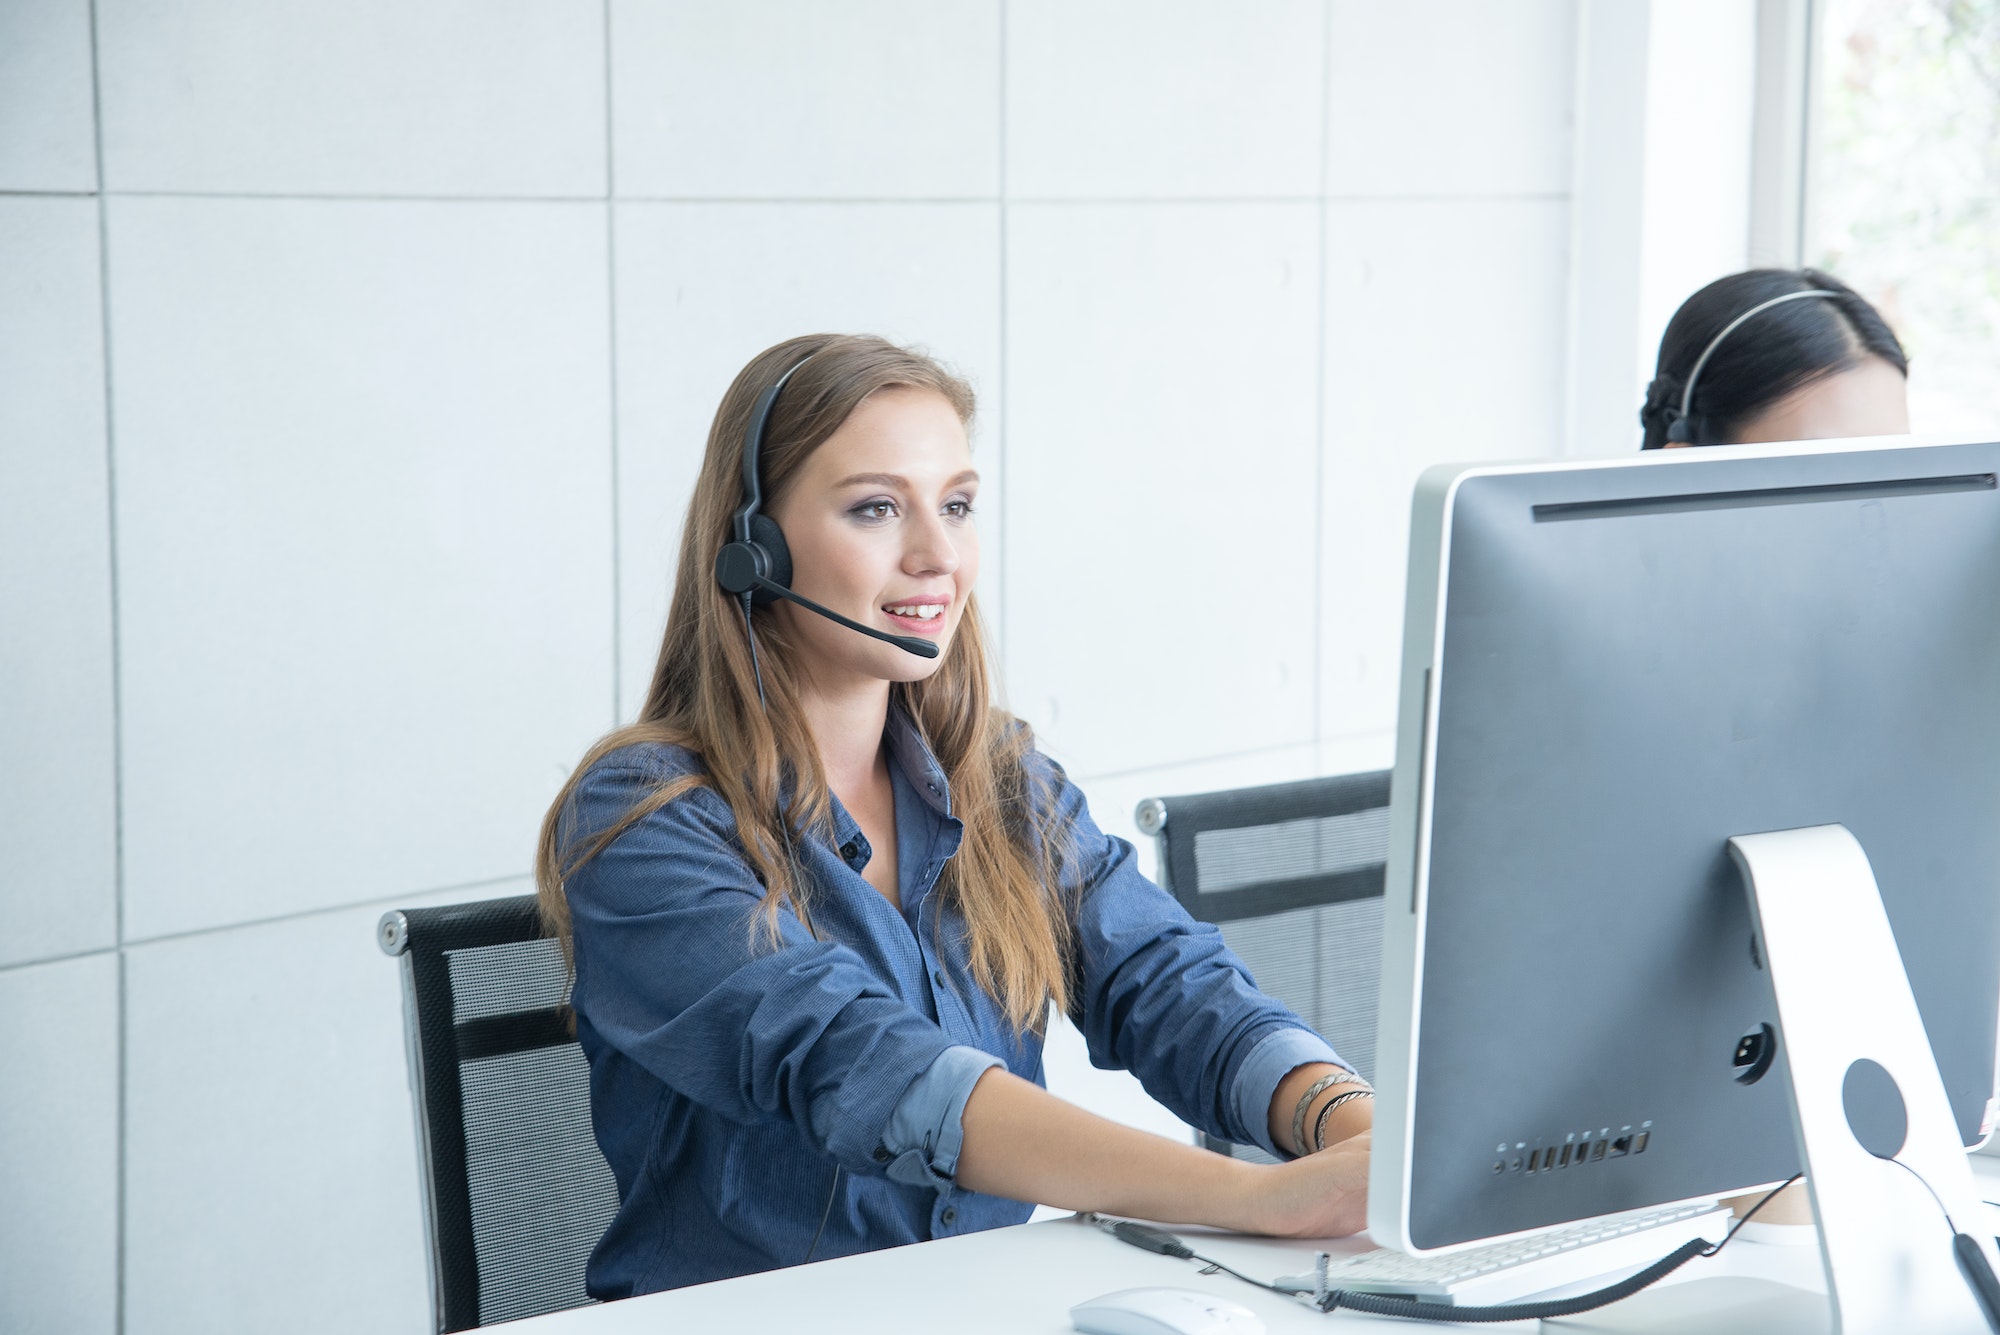 woman Call center service customer support or sales agent give advice and help solve problems